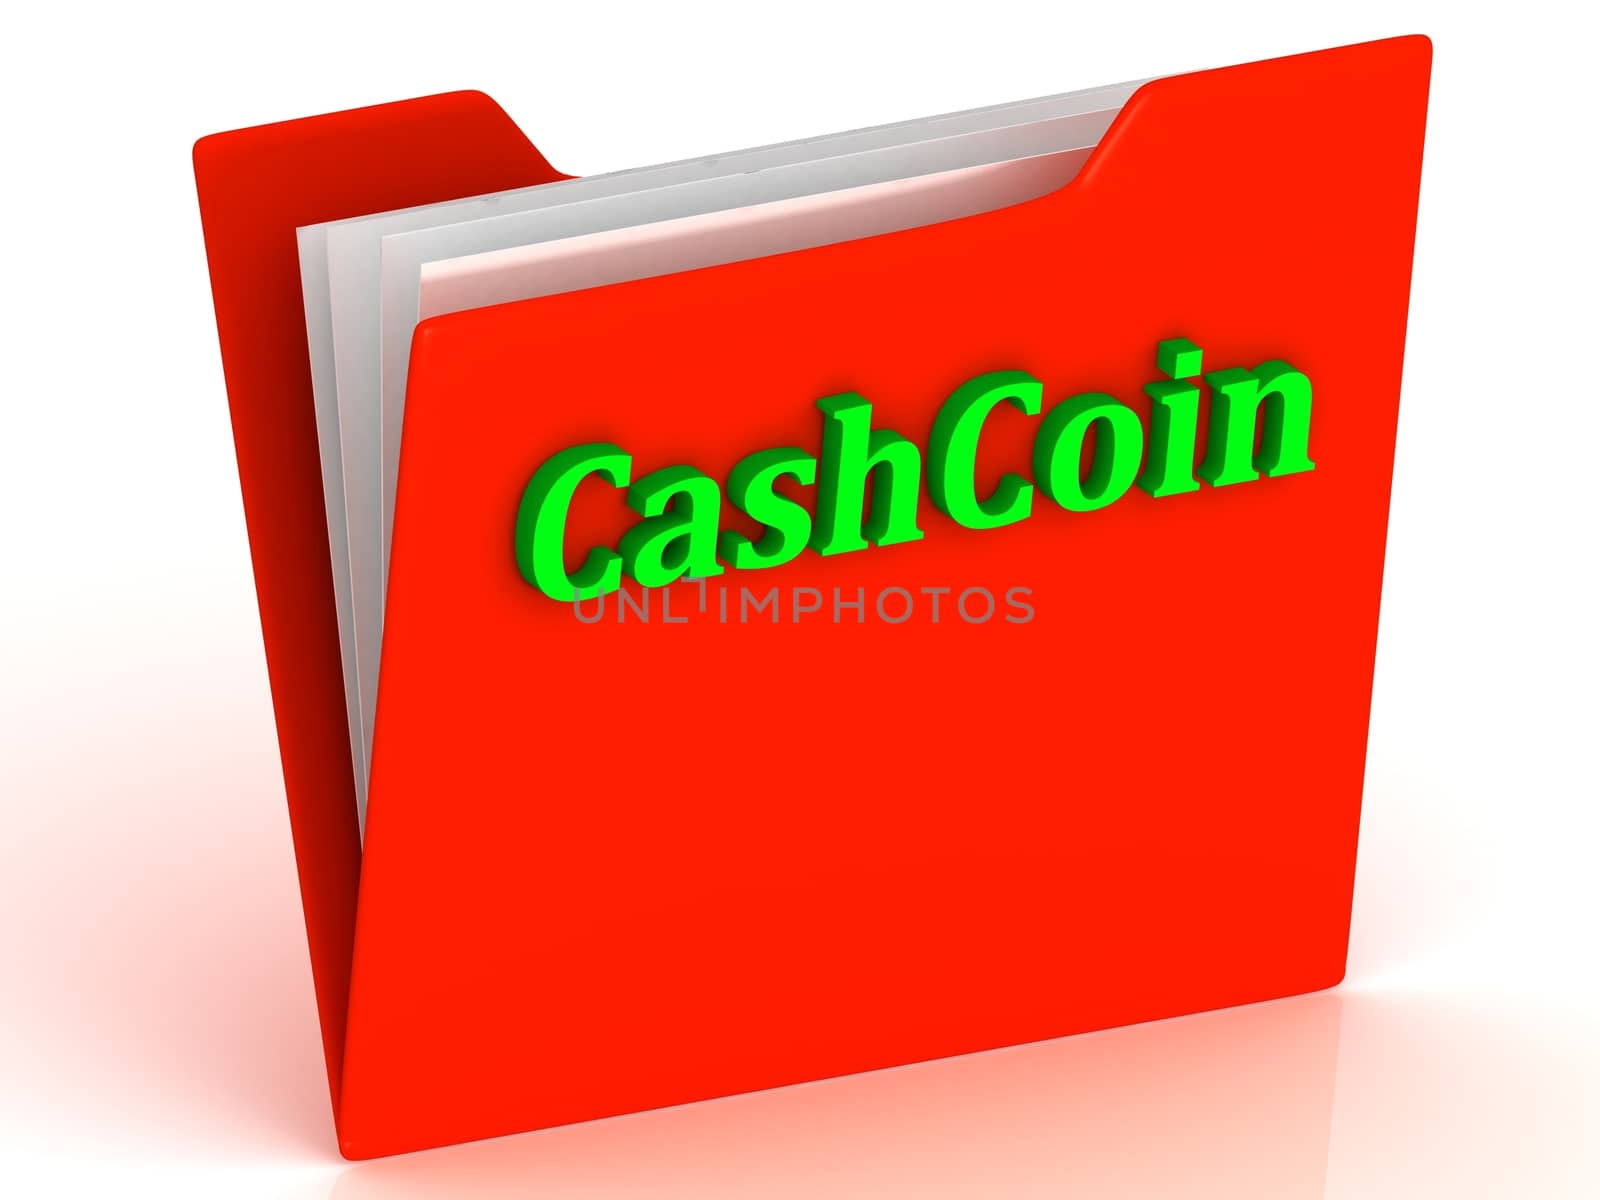 CashCoin - bright green letters on a gold folder by GreenMost